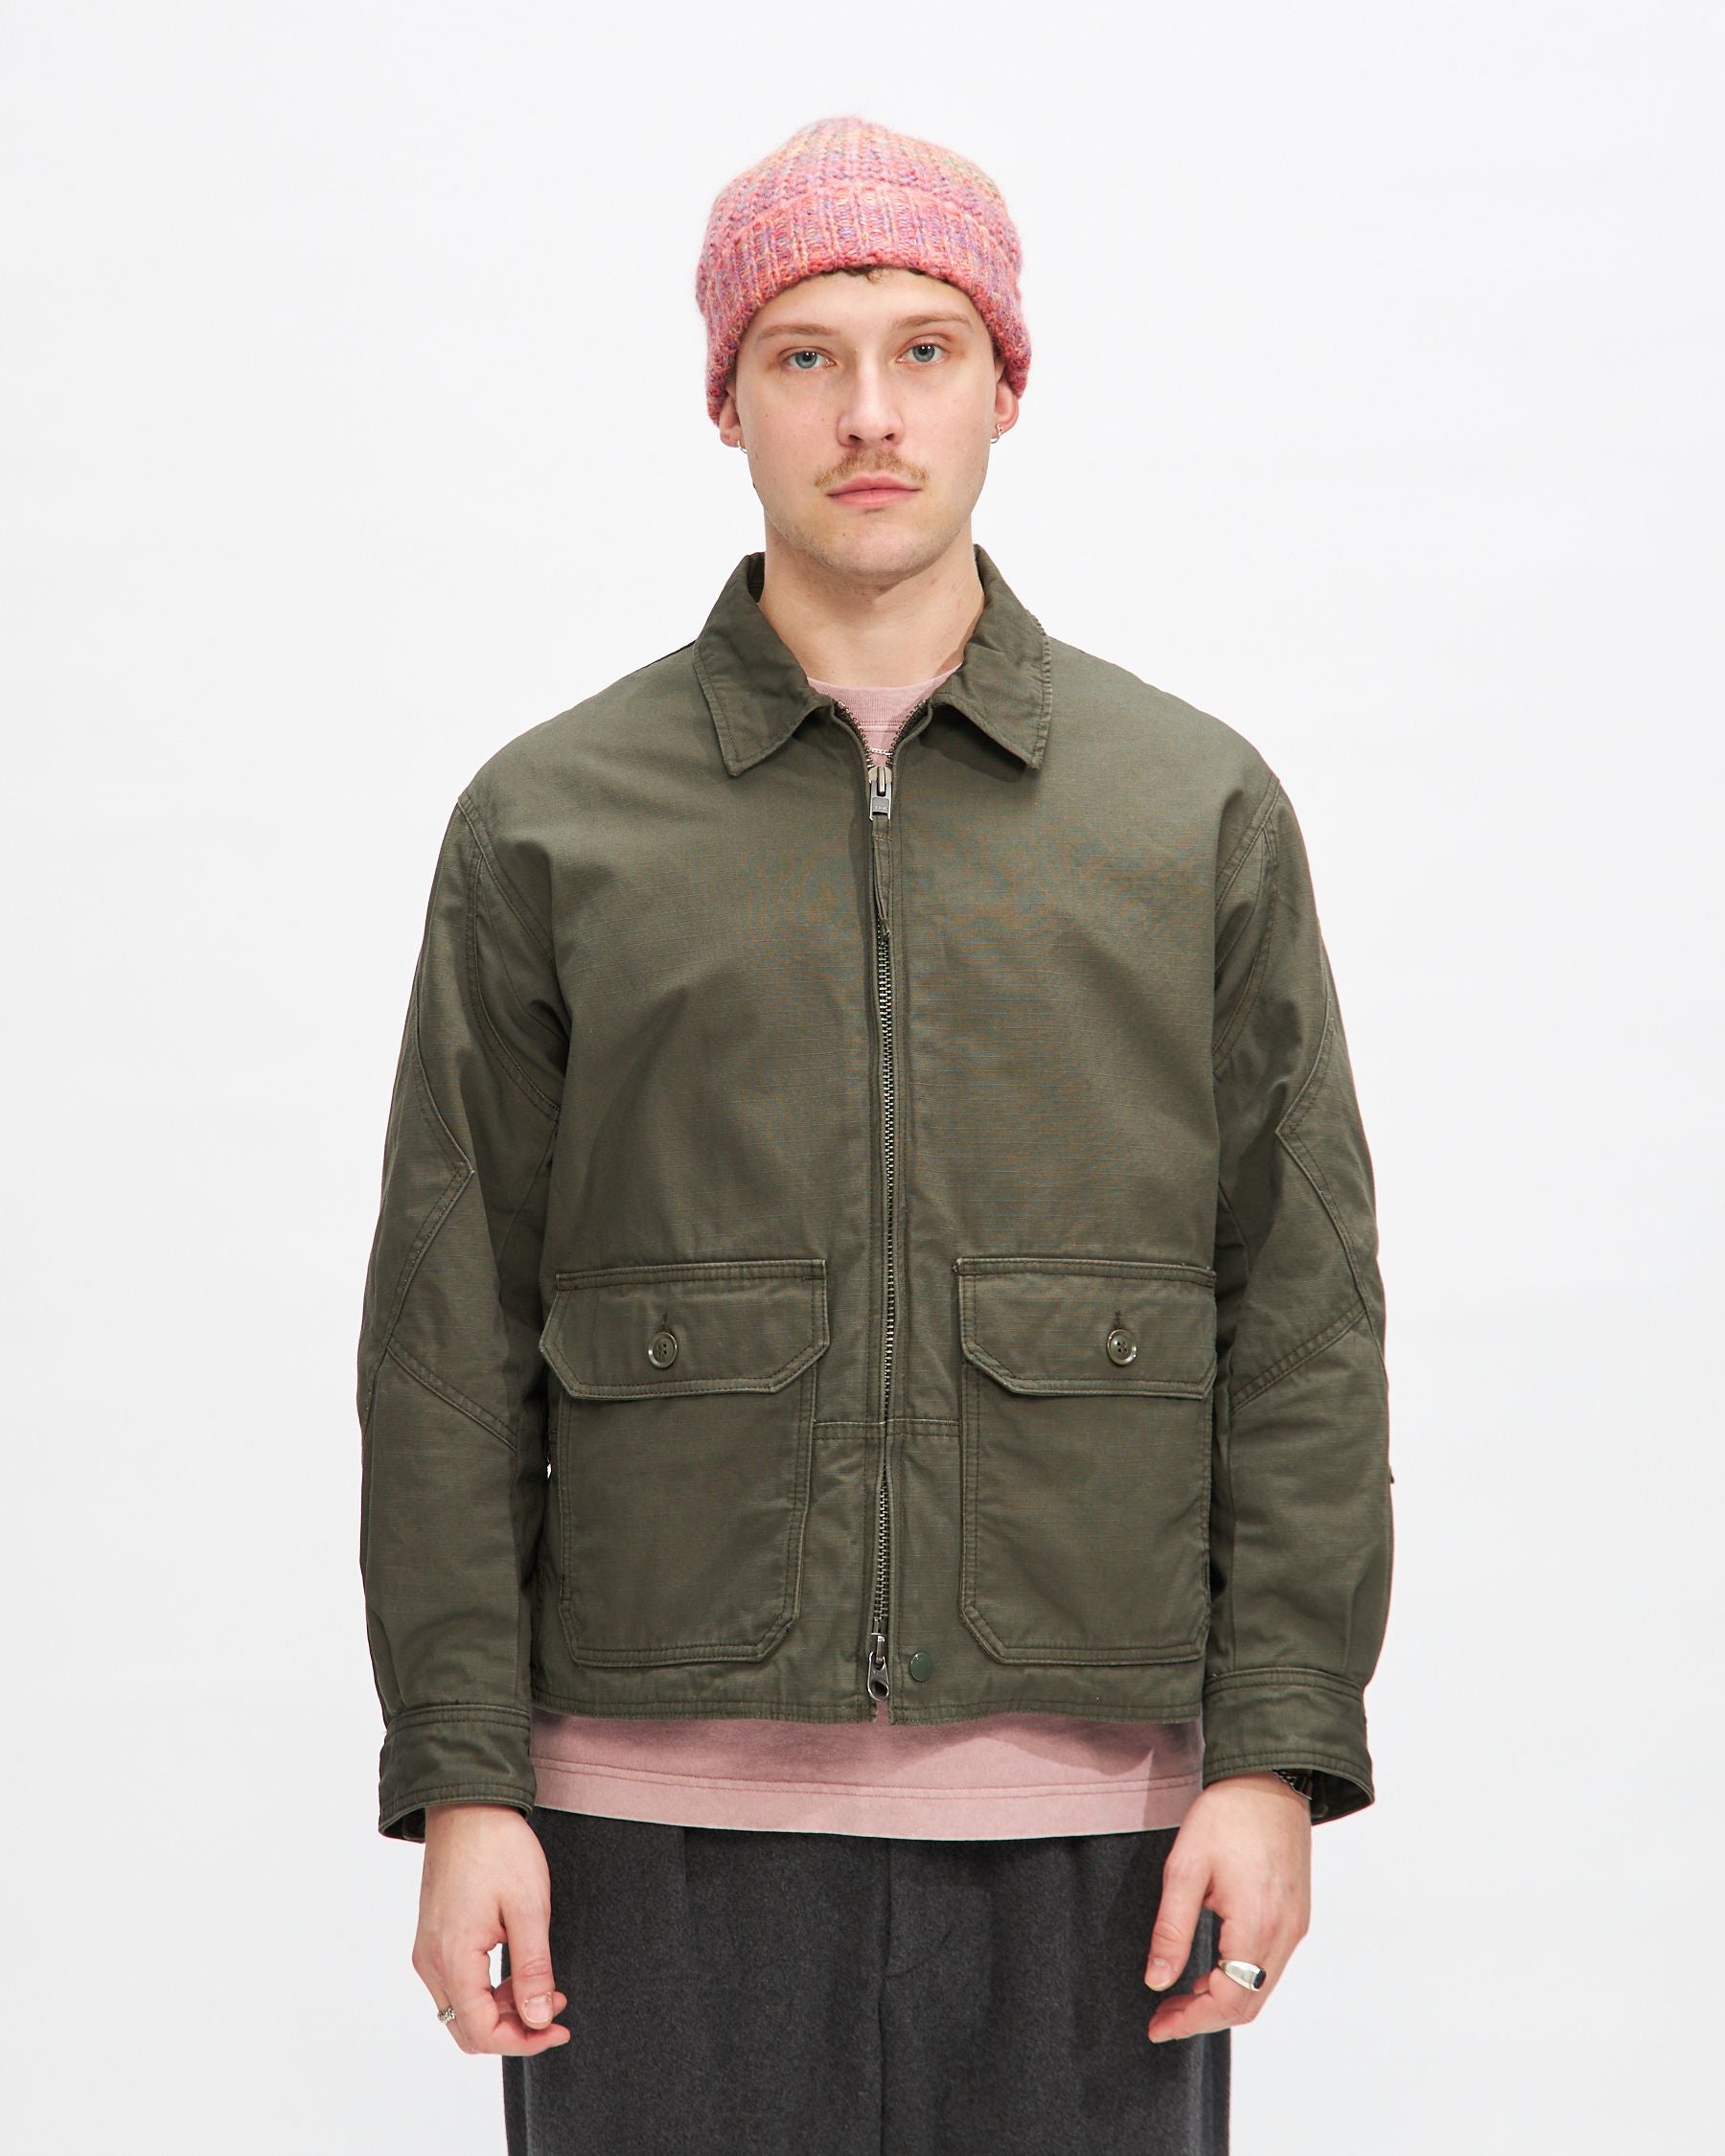 G8 Jacket in Olive Heavyweight Cotton Ripstop